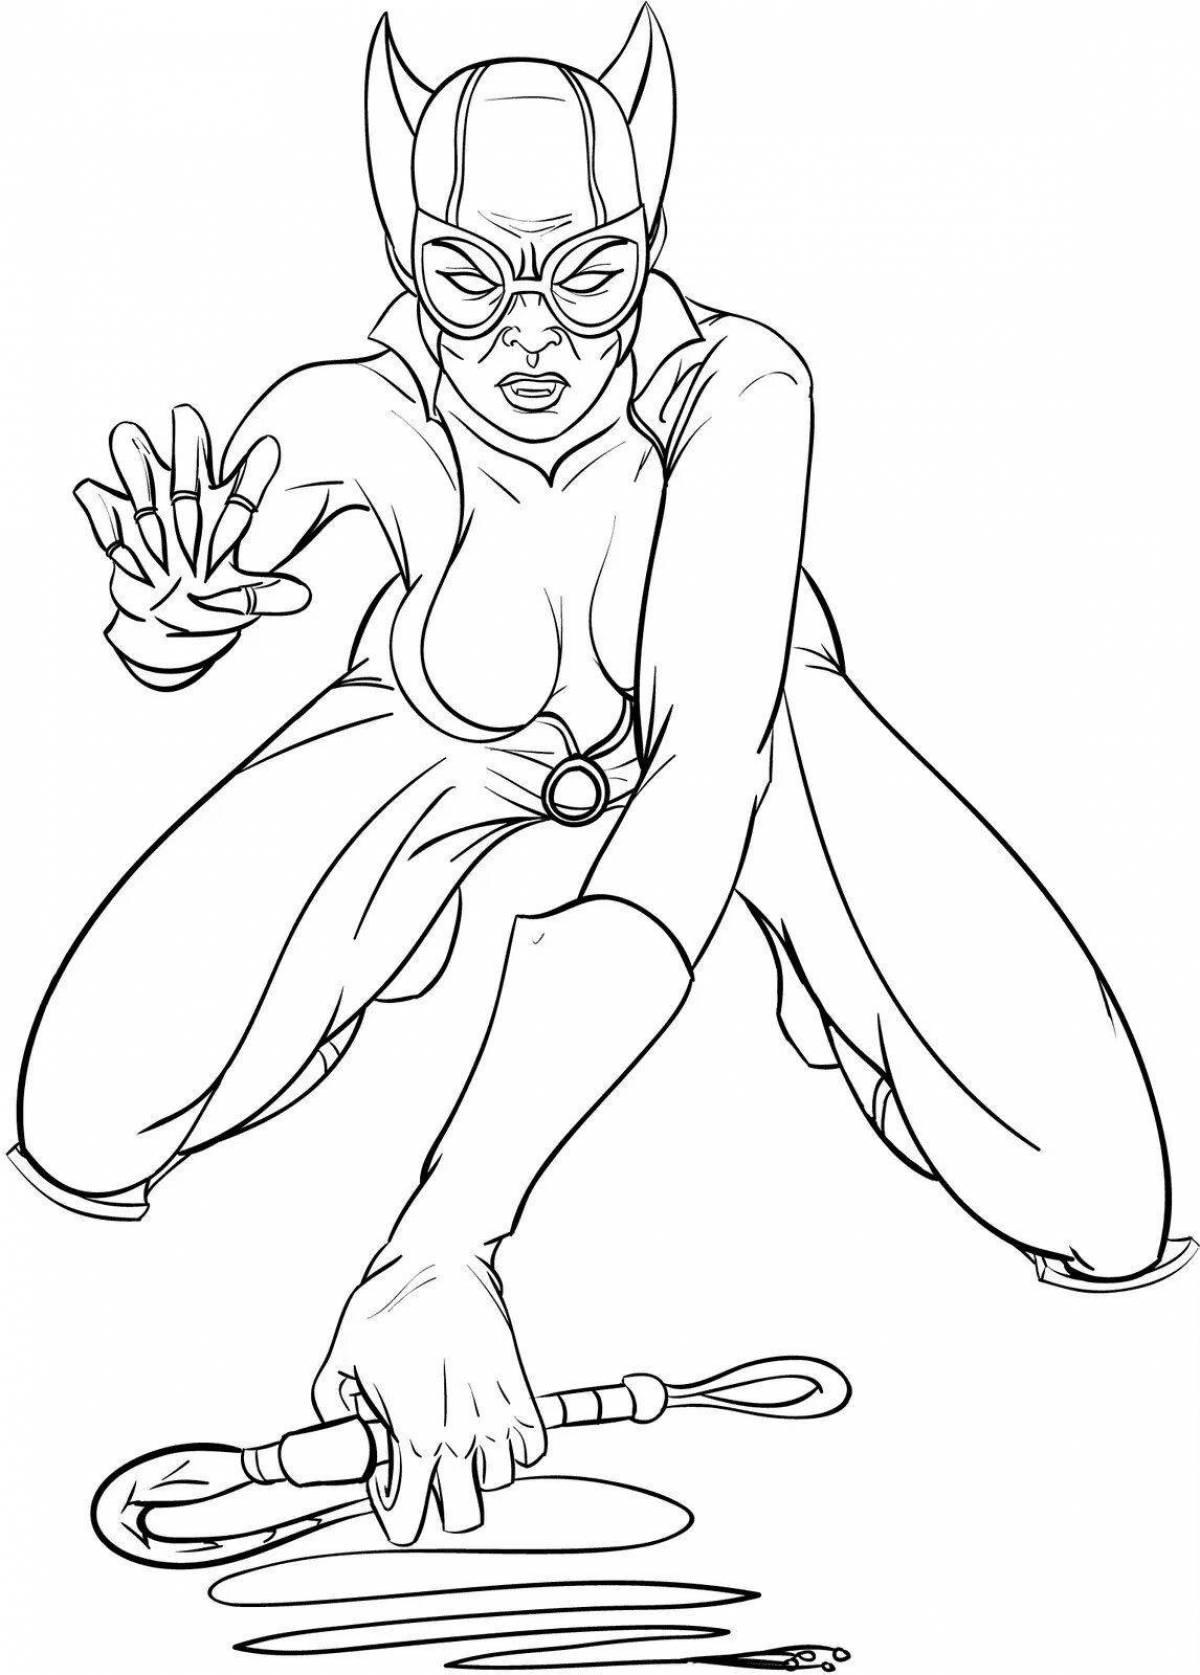 Coloring page exquisite catwoman